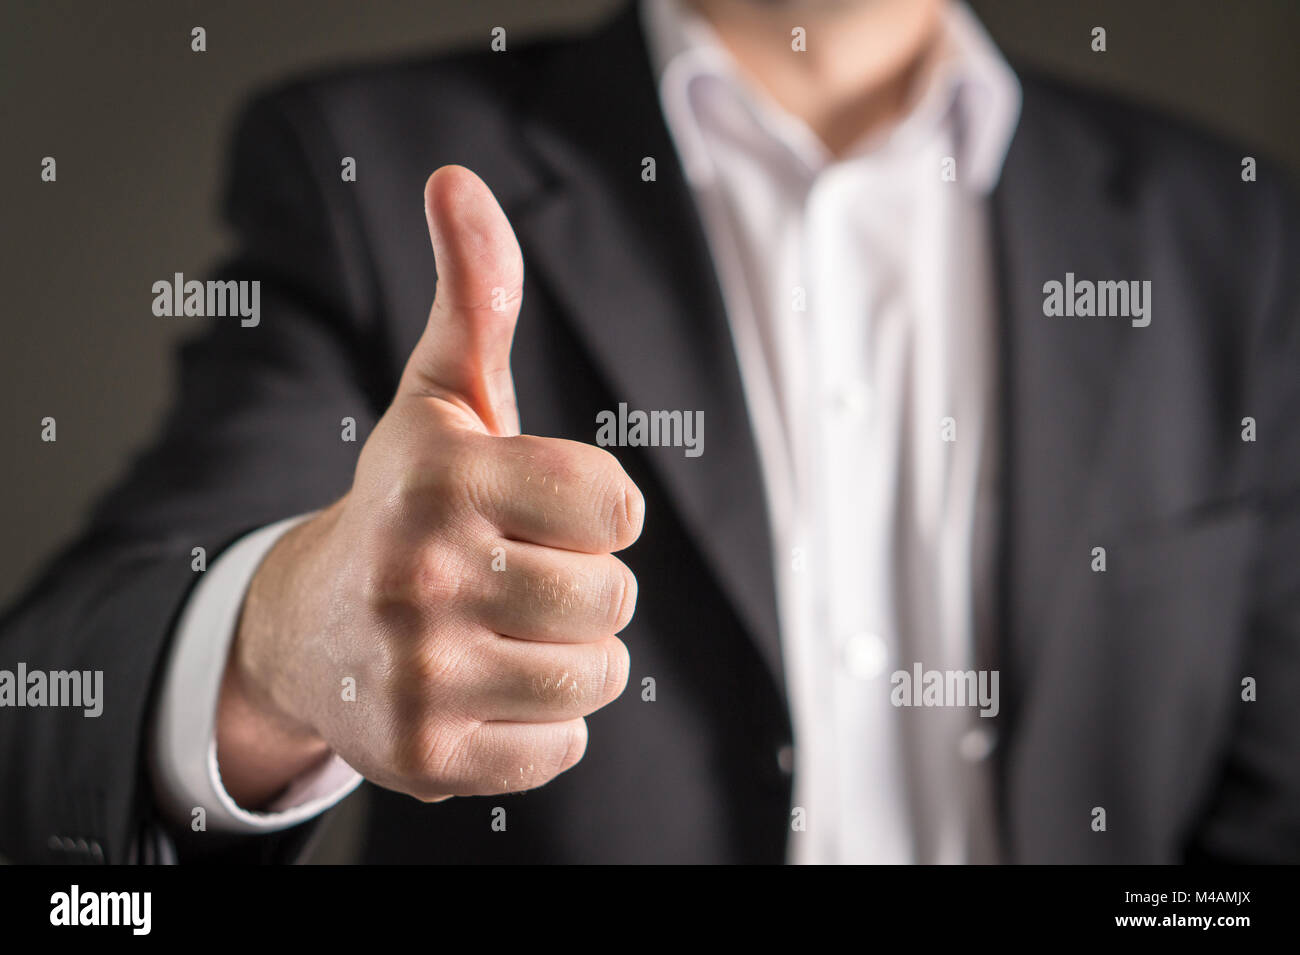 Business man showing thumbs up. Stock Photo